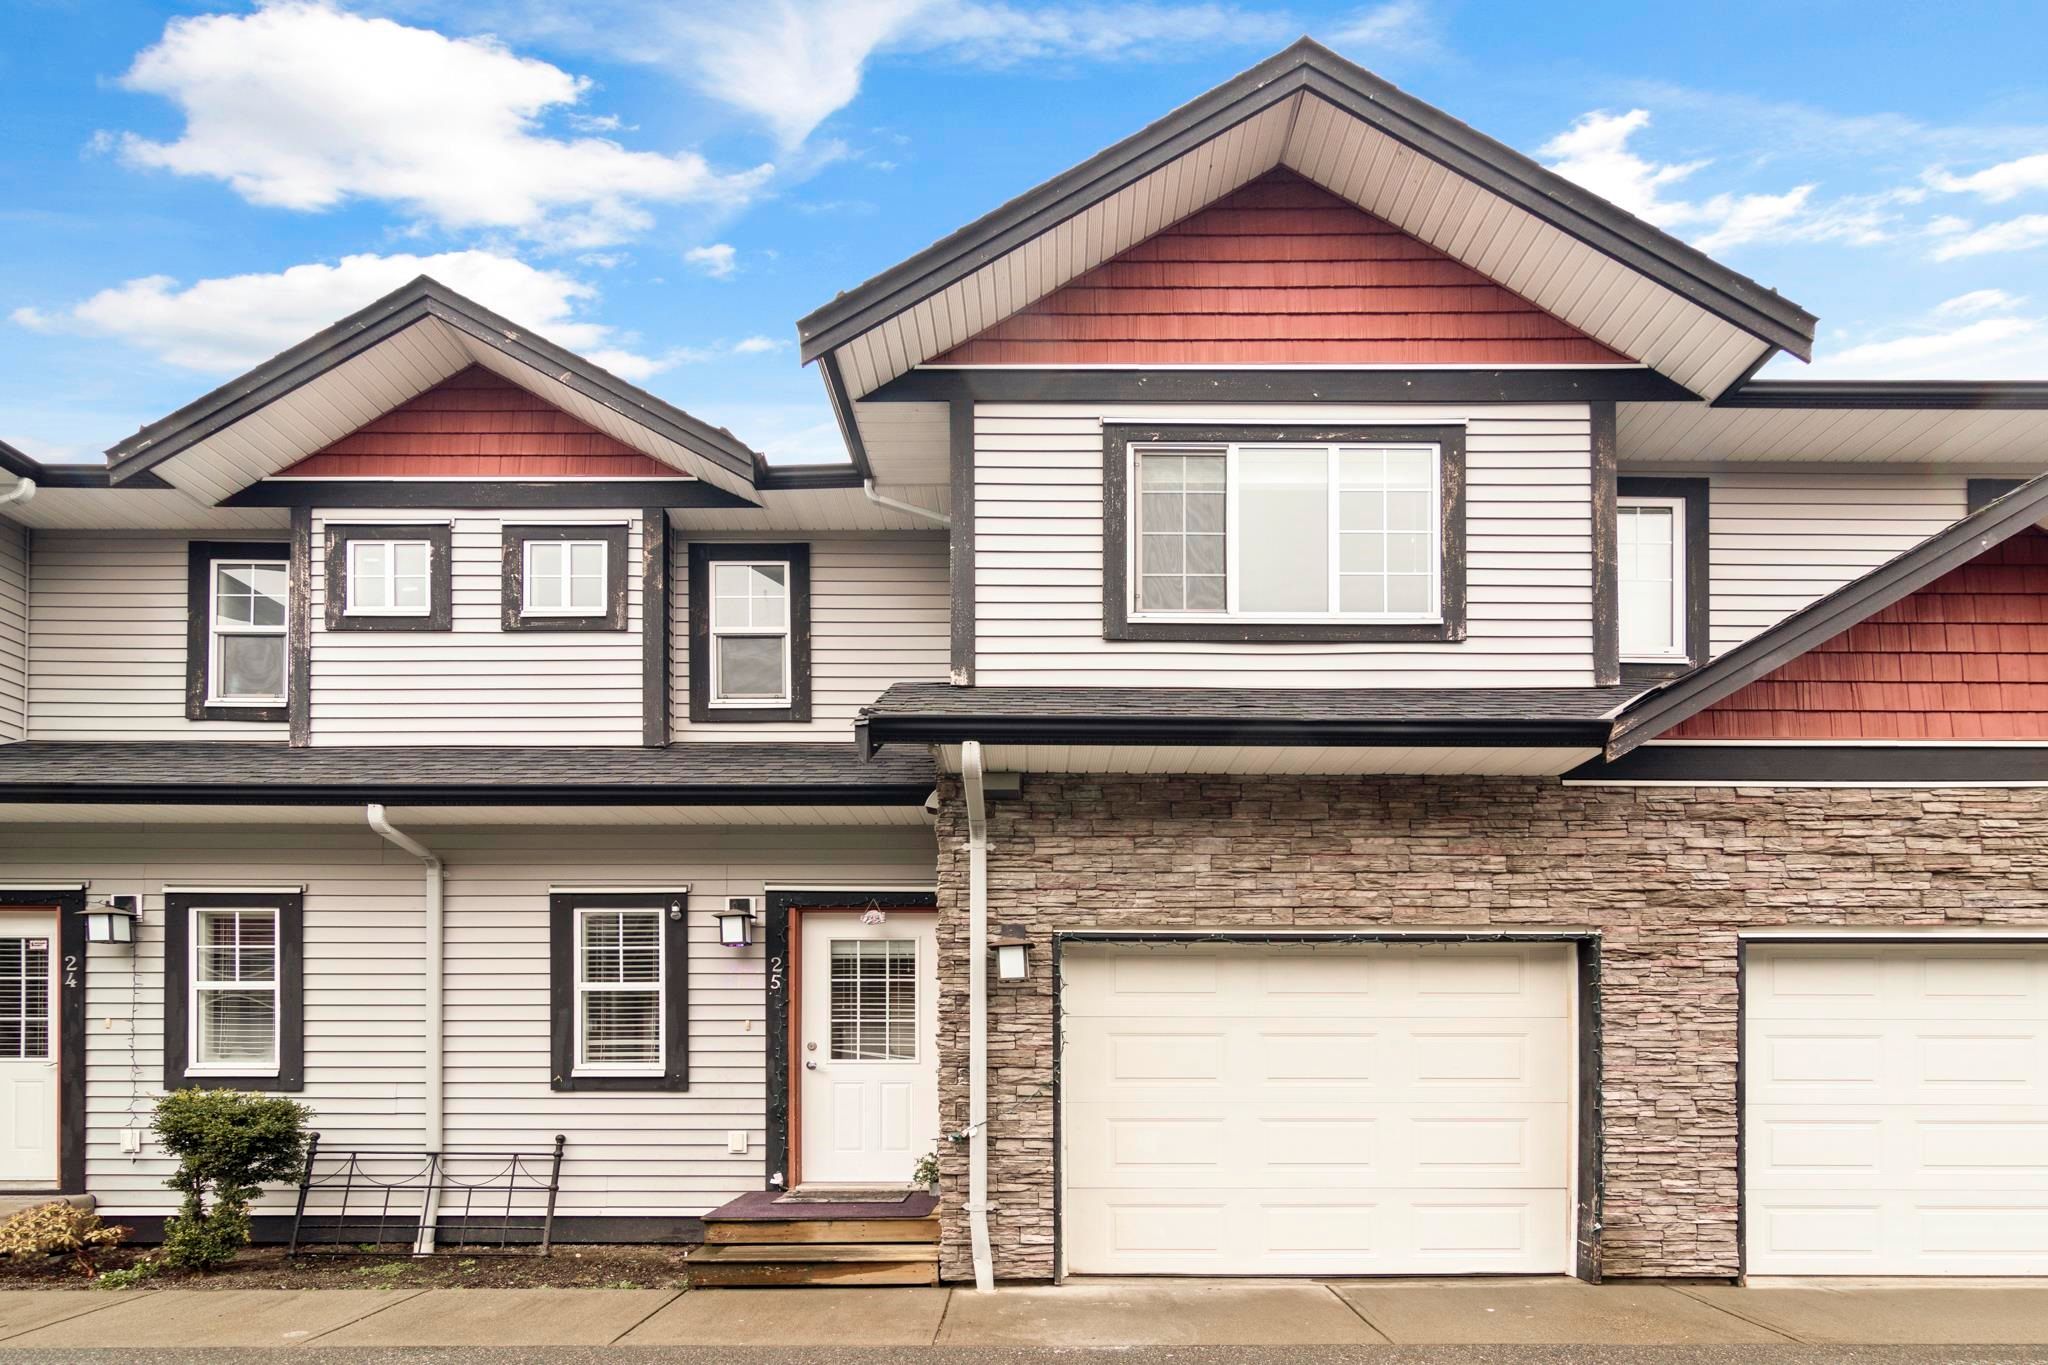 Open House. Open House on Saturday, March 26, 2022 2:00PM - 4:00PM
Come on by and check out this spacious 2000sqft plus townhouse in the most desirable area of Abbotsford